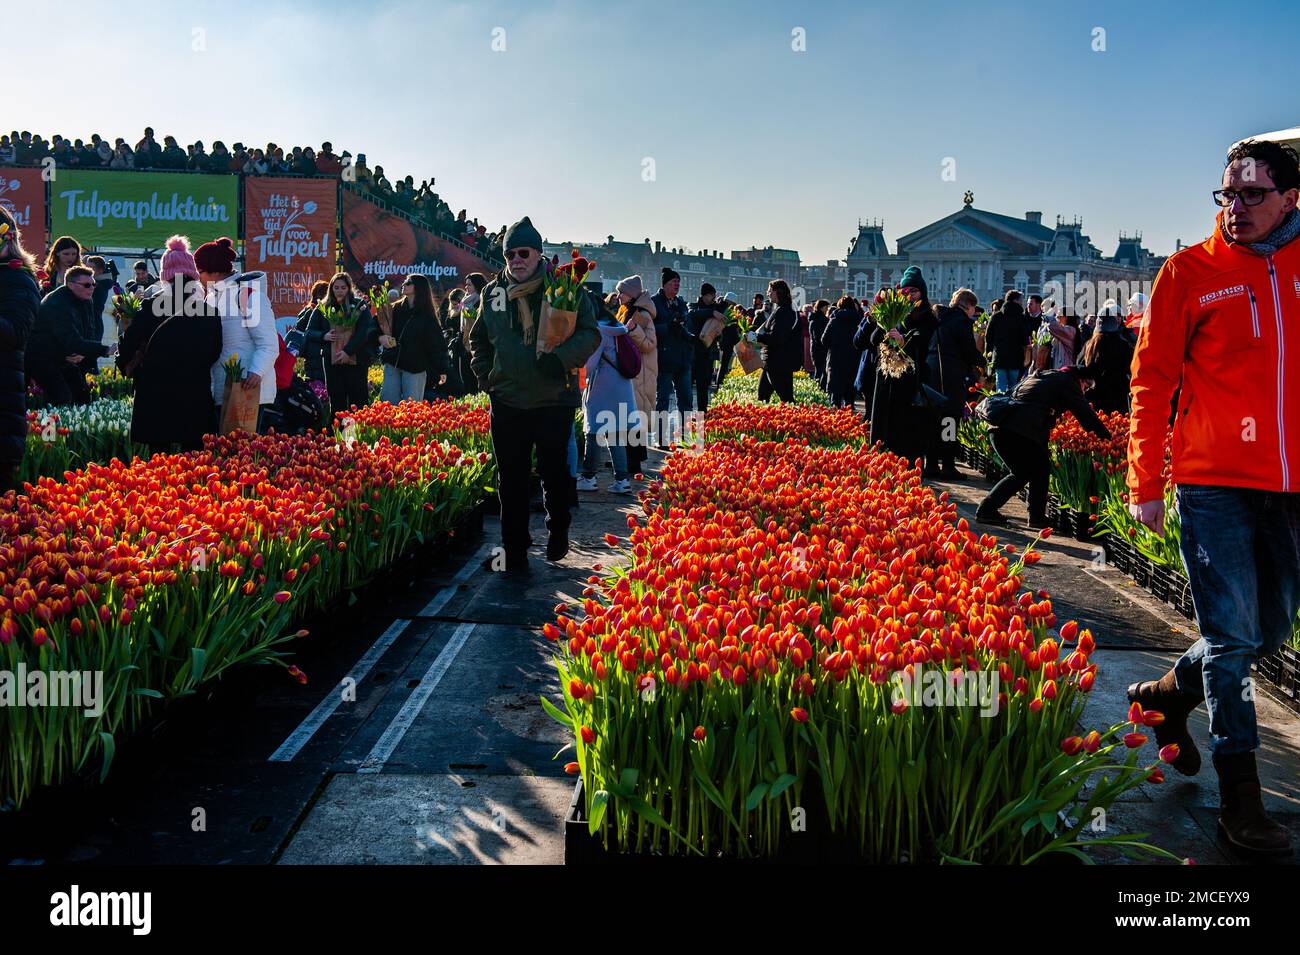 A man seen proudly walking with his bunch of tulips. Each year on the 3rd Saturday of January, the National Tulip Day is celebrated in Amsterdam. Dutch tulip growers built a huge picking garden with more than 200,000 colorful tulips at the Museumplein in Amsterdam. Visitors are allowed to pick tulips for free. The event was opened by Olympic skating champion, Irene Schouten. Prior to the opening, she christened a new tulip: Tulipa 'Dutch Pearl' as a reference to the world - famous painting 'The girl with a pearl earring' by Johannes Vermeer. (Photo by Ana Fernandez/SOPA Images/Sipa USA) Stock Photo